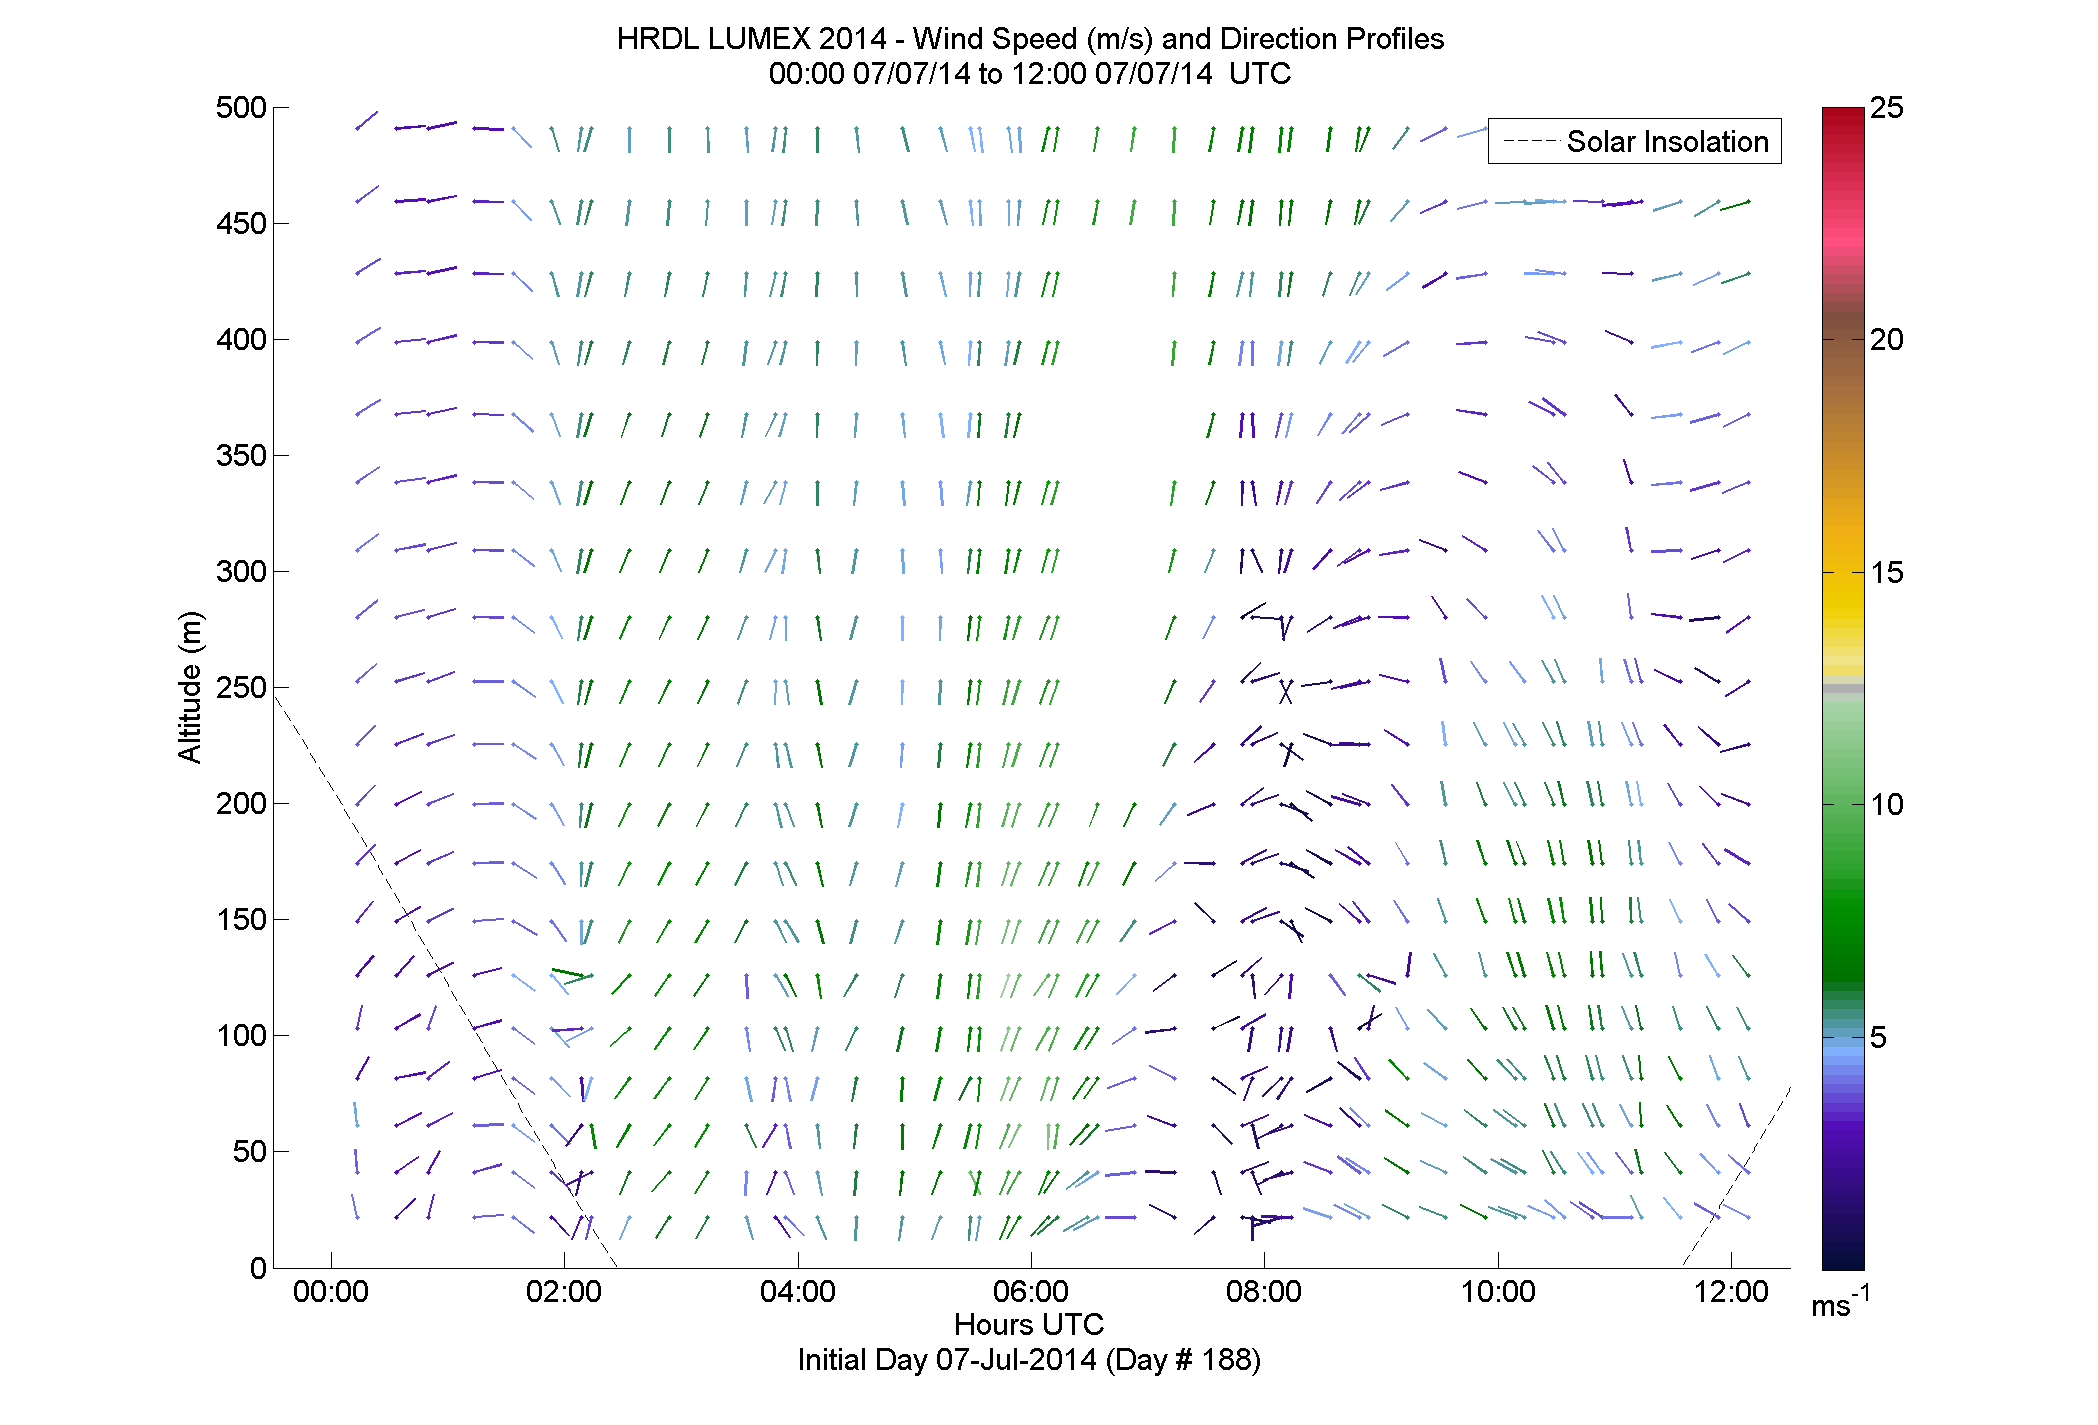 HRDL speed and direction profile - July 7 am